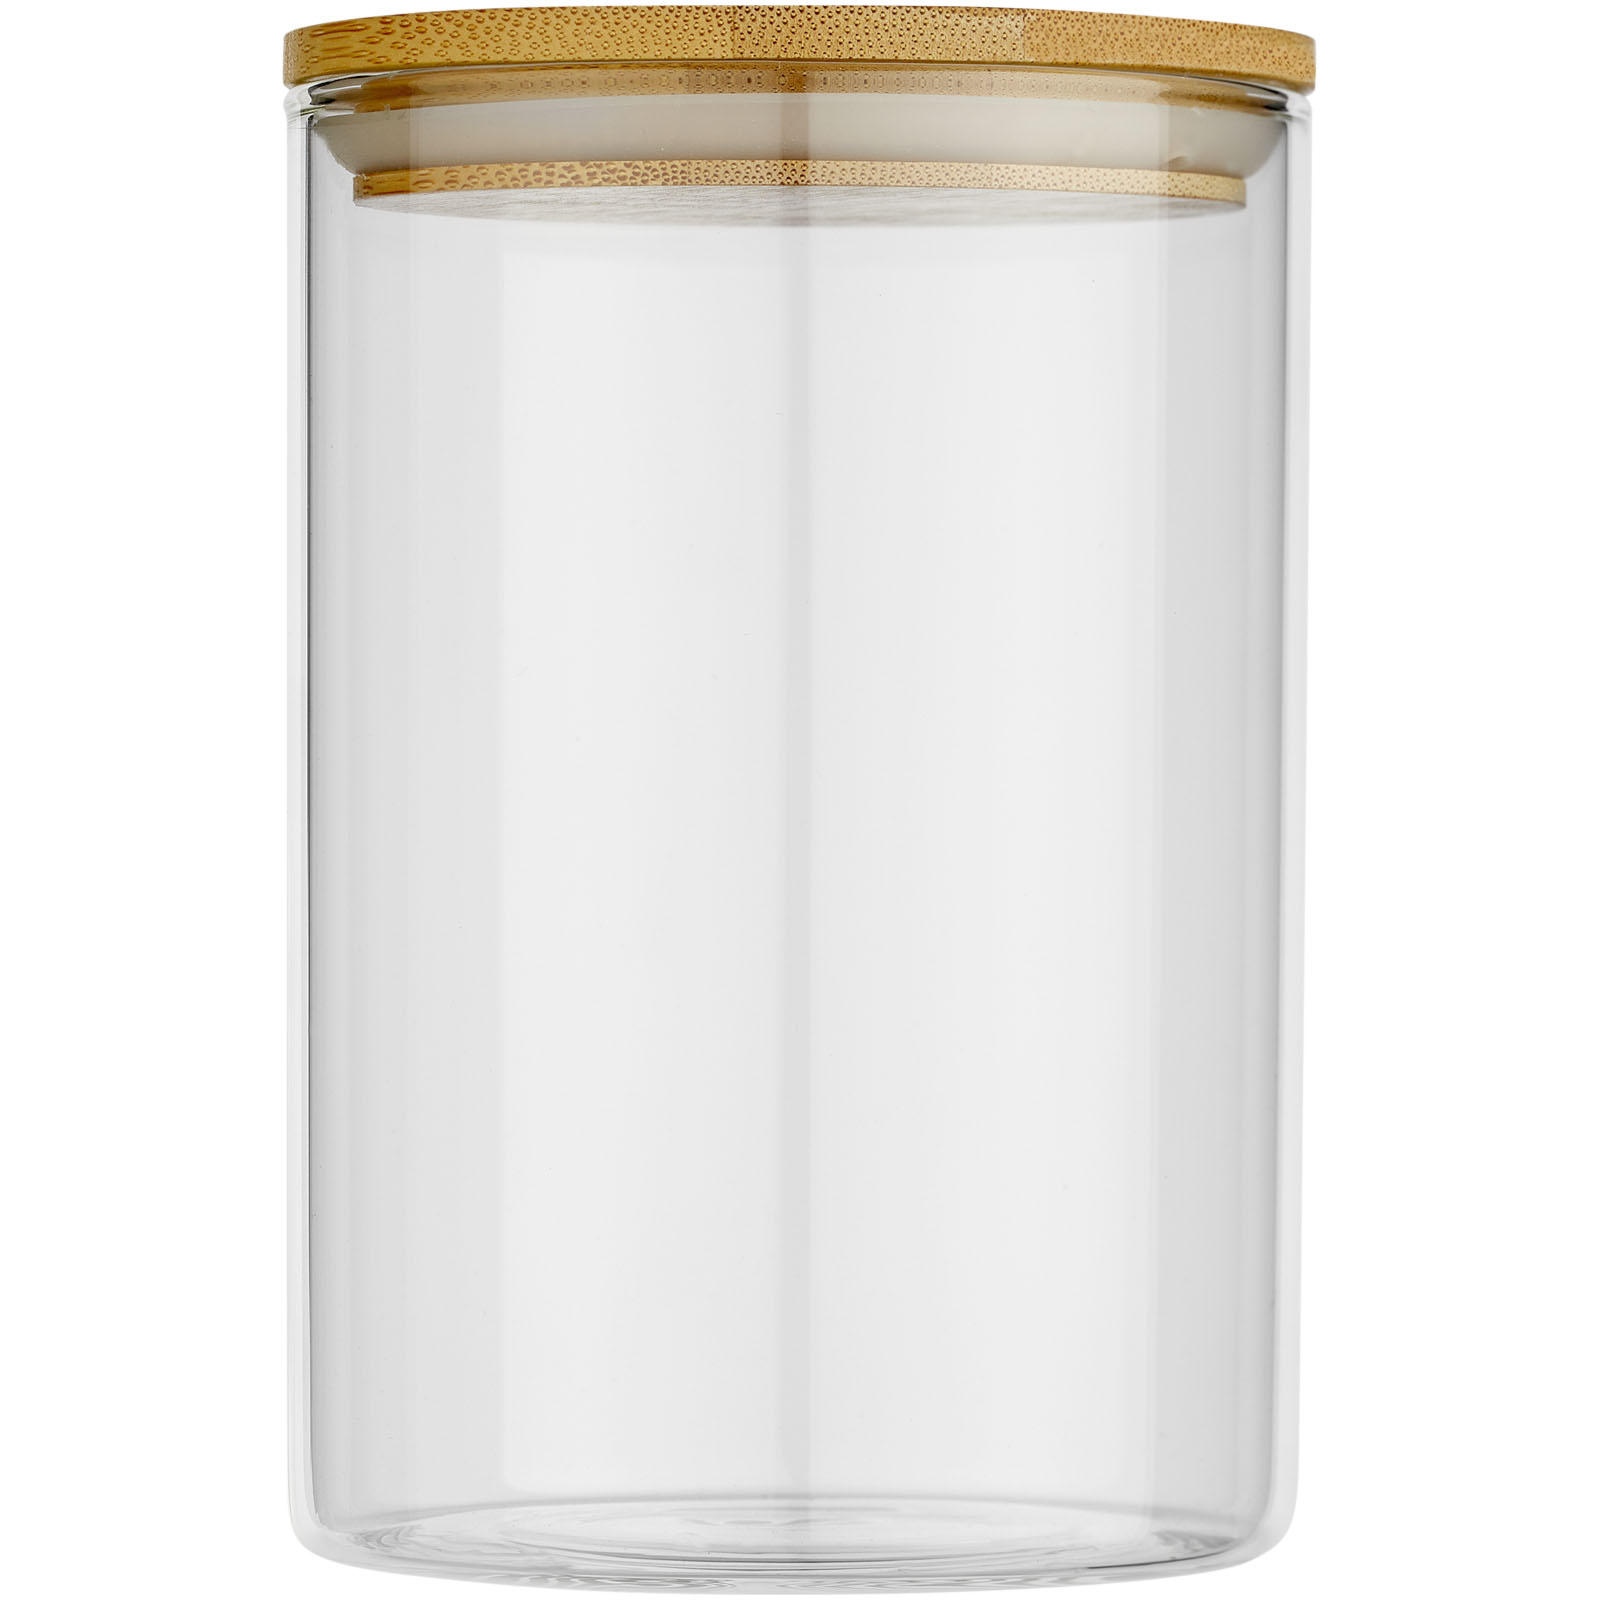 Advertising Kitchenware - Boley 550 ml glass food container - 2